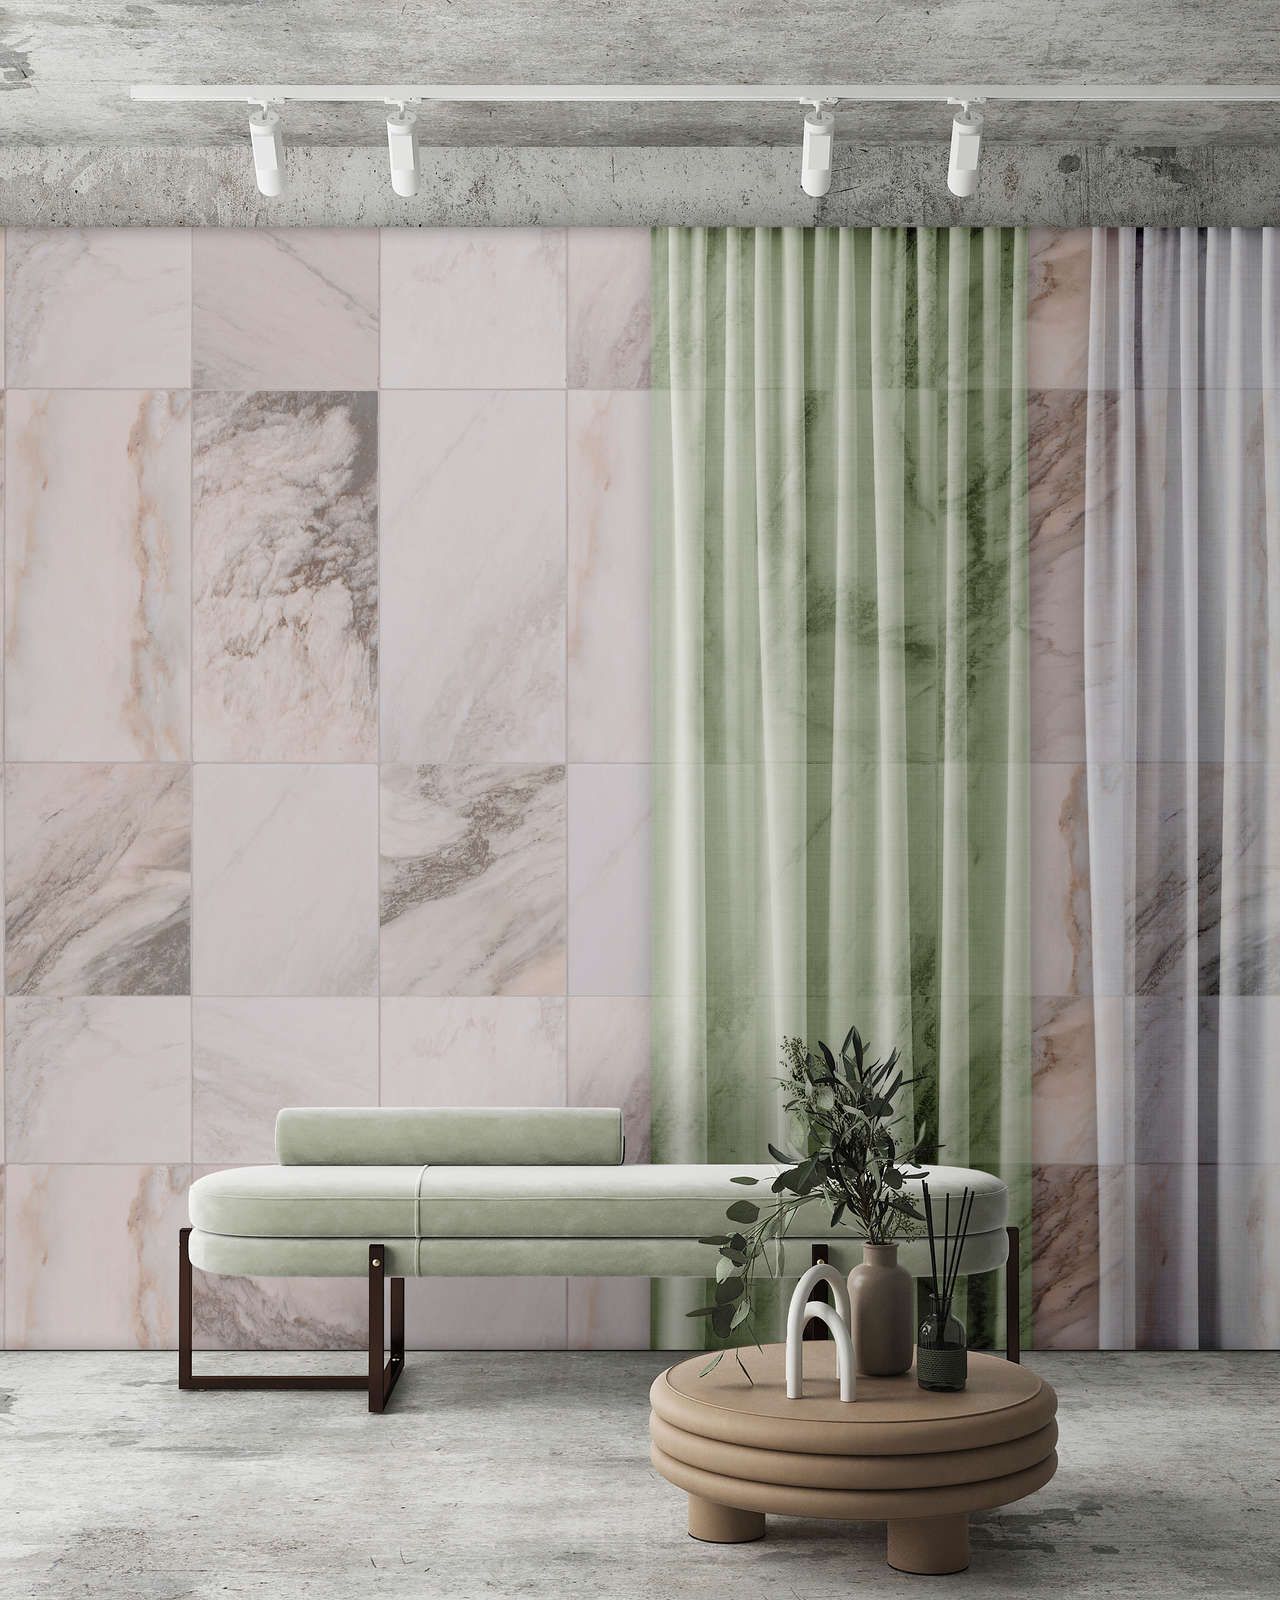             Photo wallpaper »nova 2« - Pastel coloured curtains in front of a beige marble wall - Lightly textured non-woven fabric
        